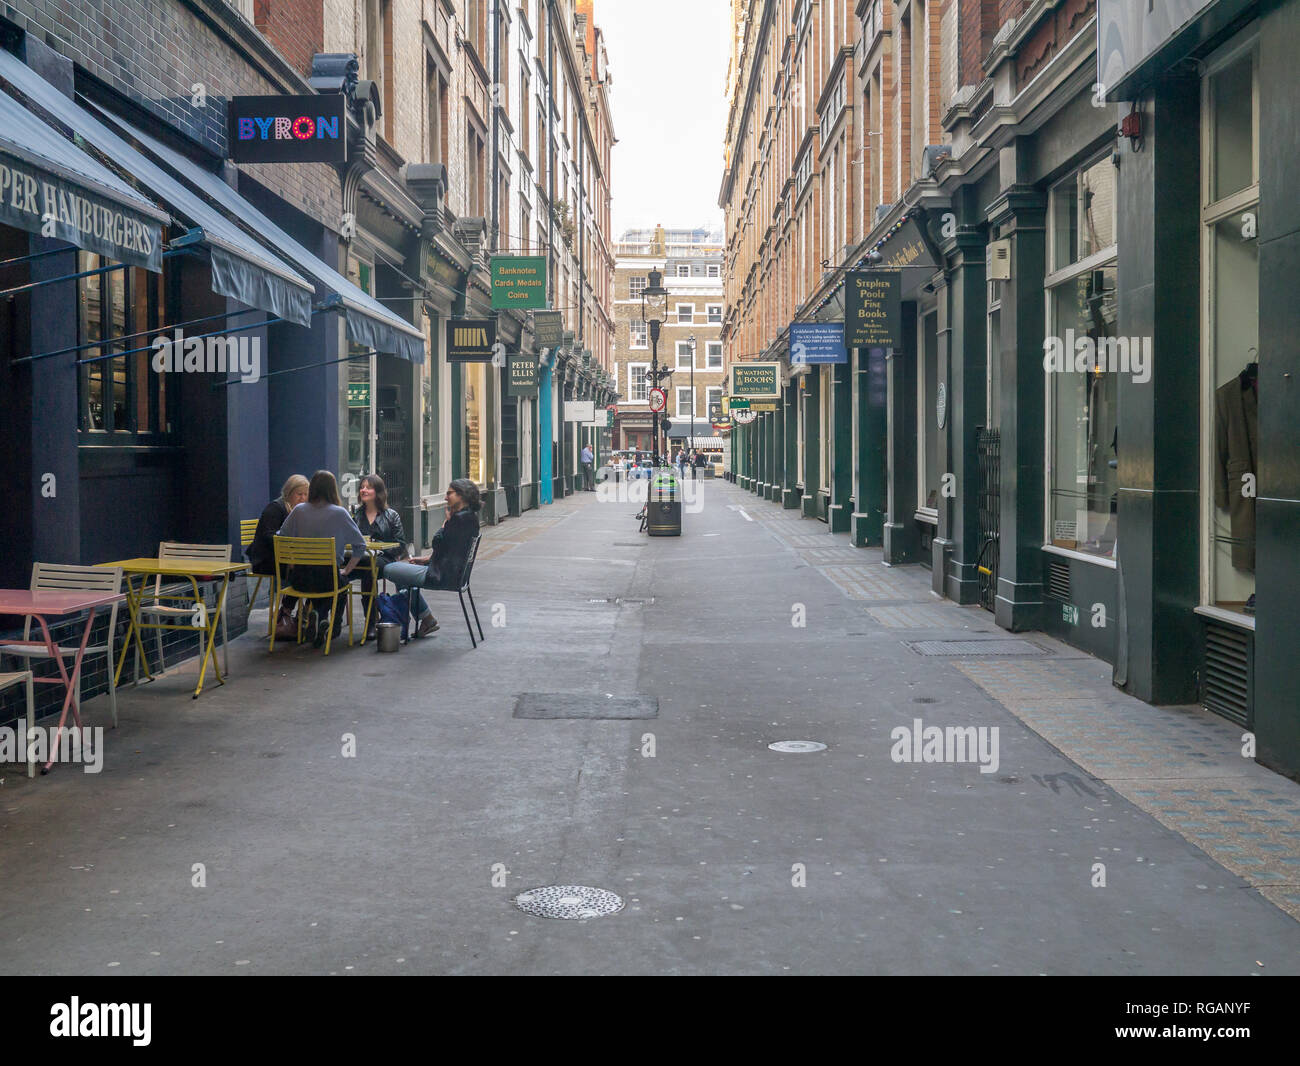 St. Martins, London, UK - May 16, 2014: View looking down Cecil court from St. Martins towards Charring Cross Road.  A narrow alley with many booksell Stock Photo